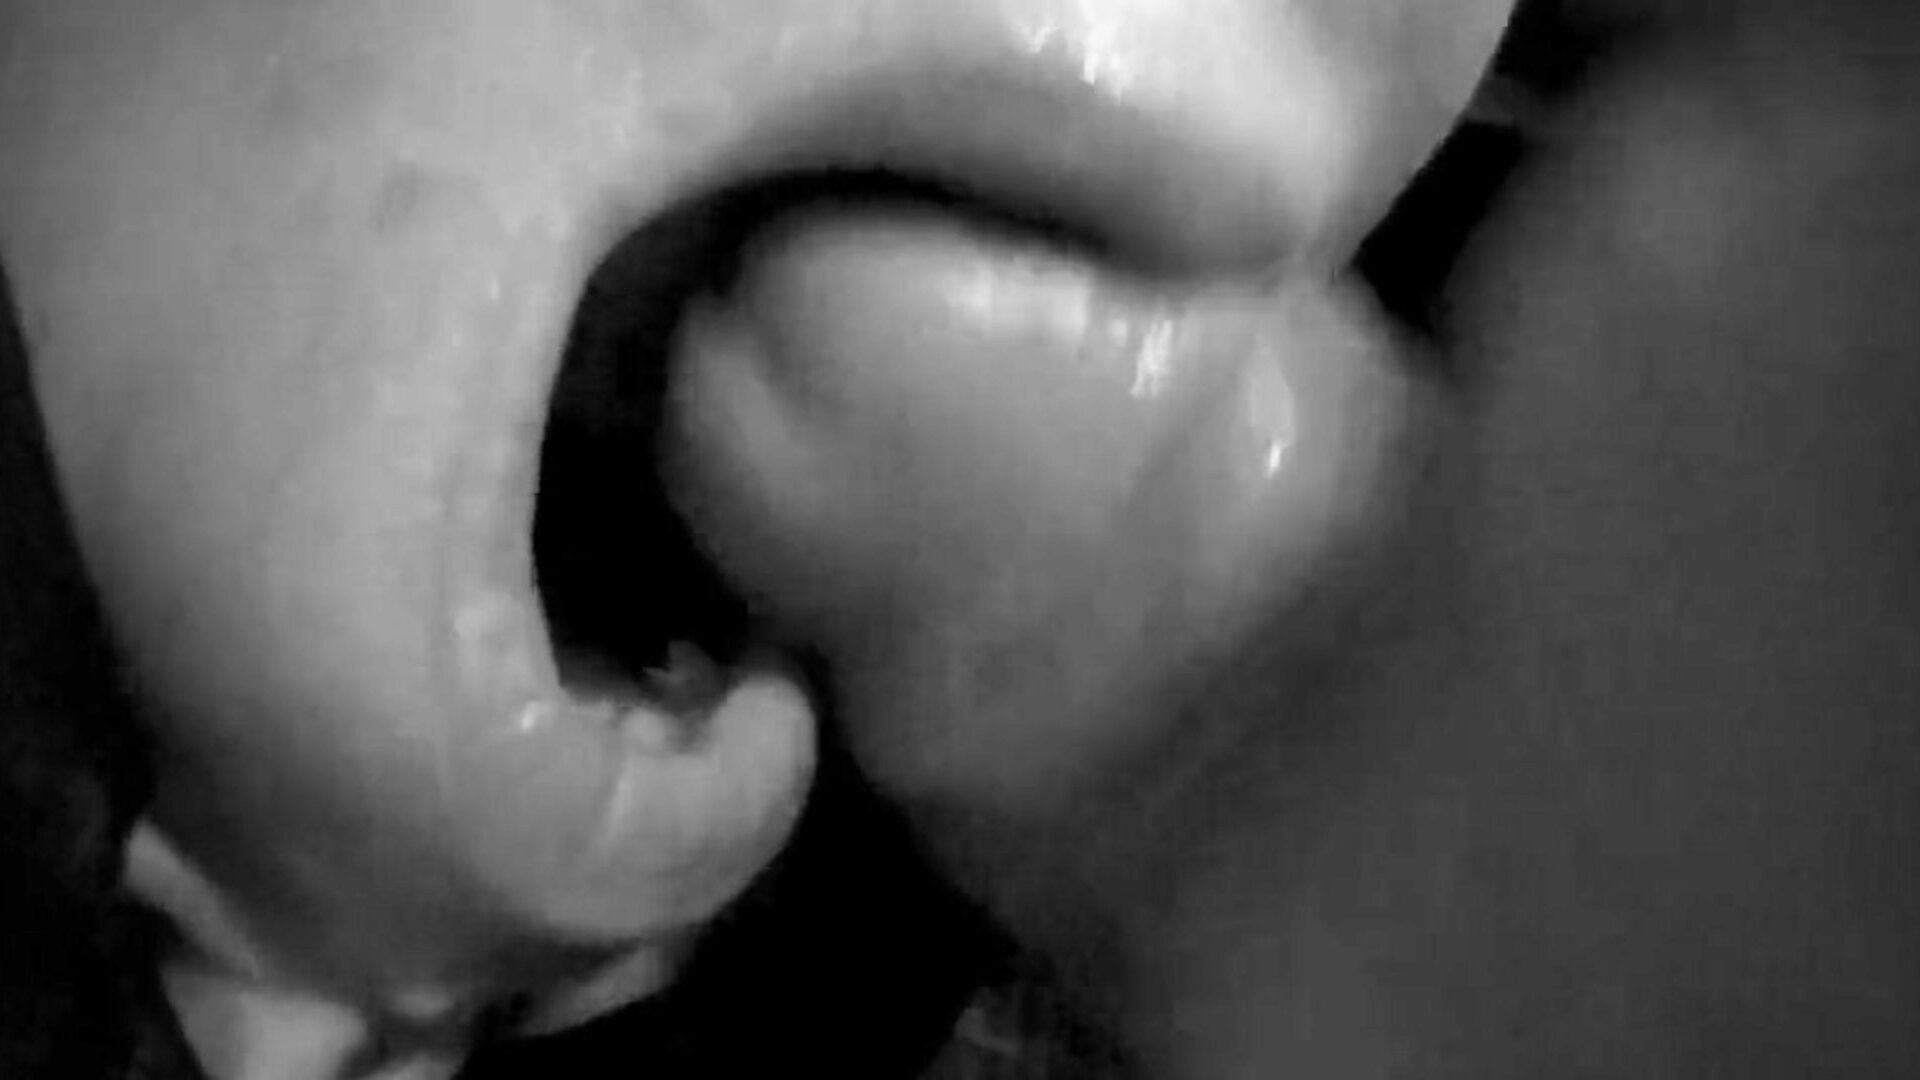 Mouth Fuck and Cum in Mouth of Wife Slut Big Tit Sucking | xHamster Watch Mouth Fuck and Cum in Mouth of Wife Slut Big Tit Sucking Facial clip on xHamster - the ultimate archive of free-for-all French Tube Slut HD pornography tube movie scenes